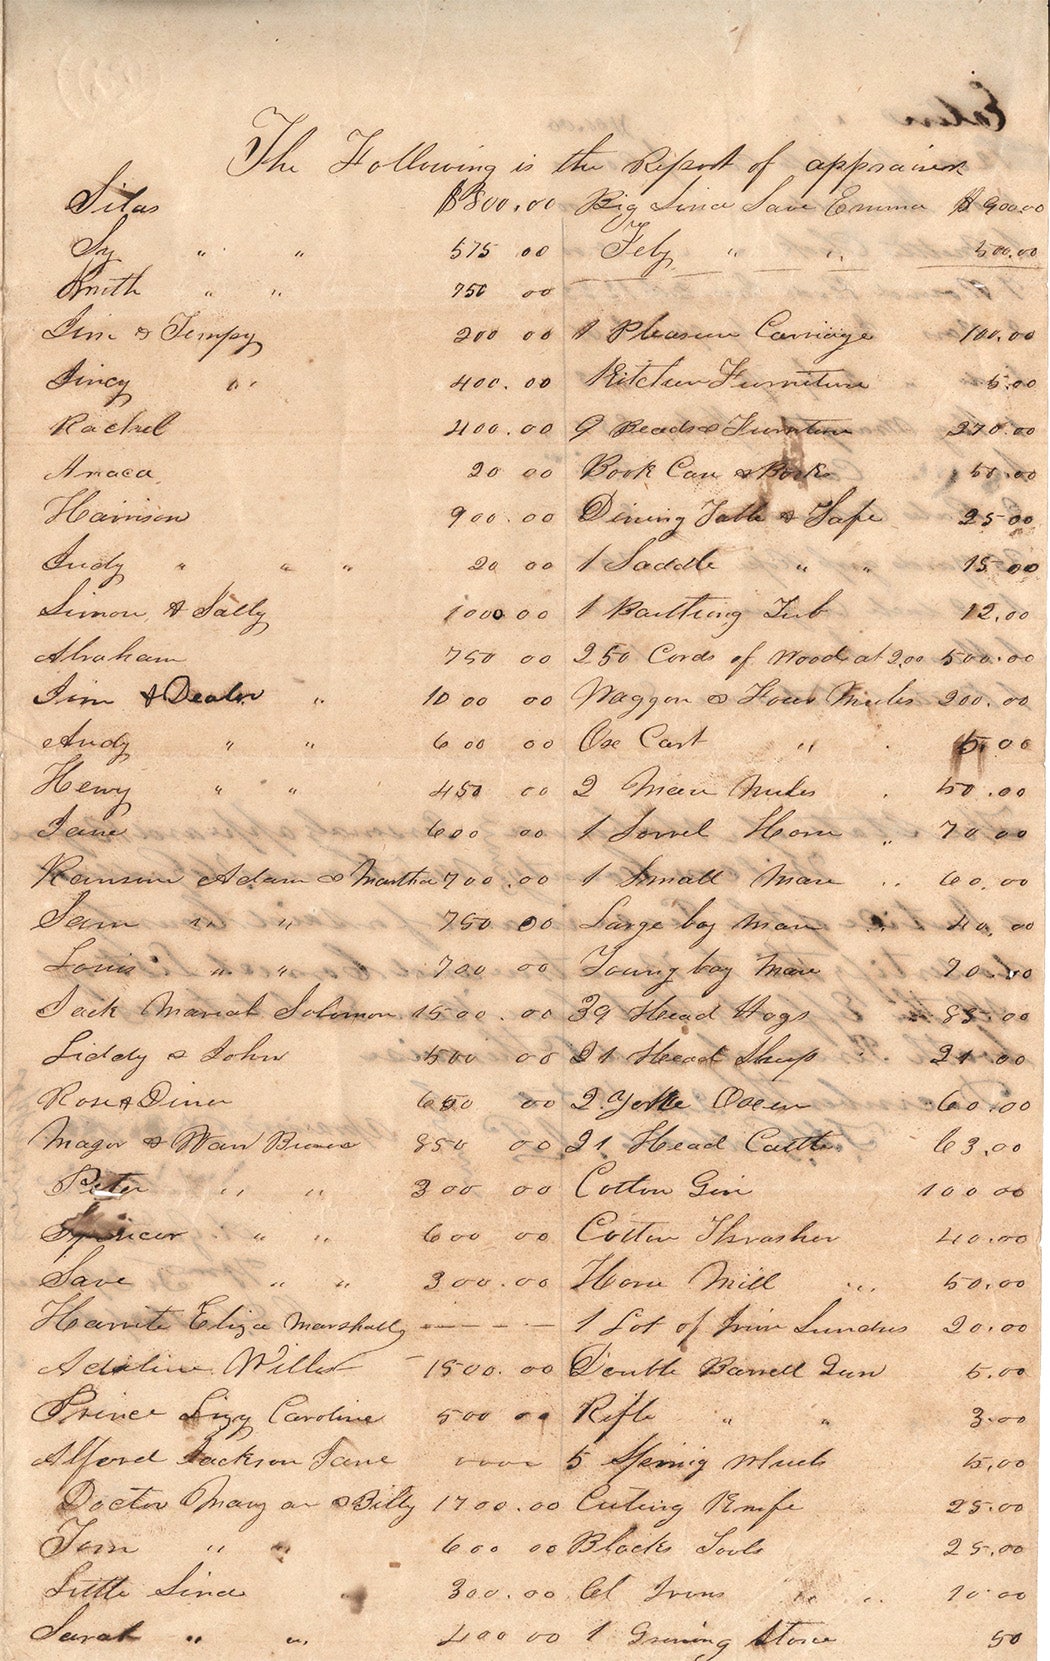 Appraisal of the estate of William B. Stover, 1850